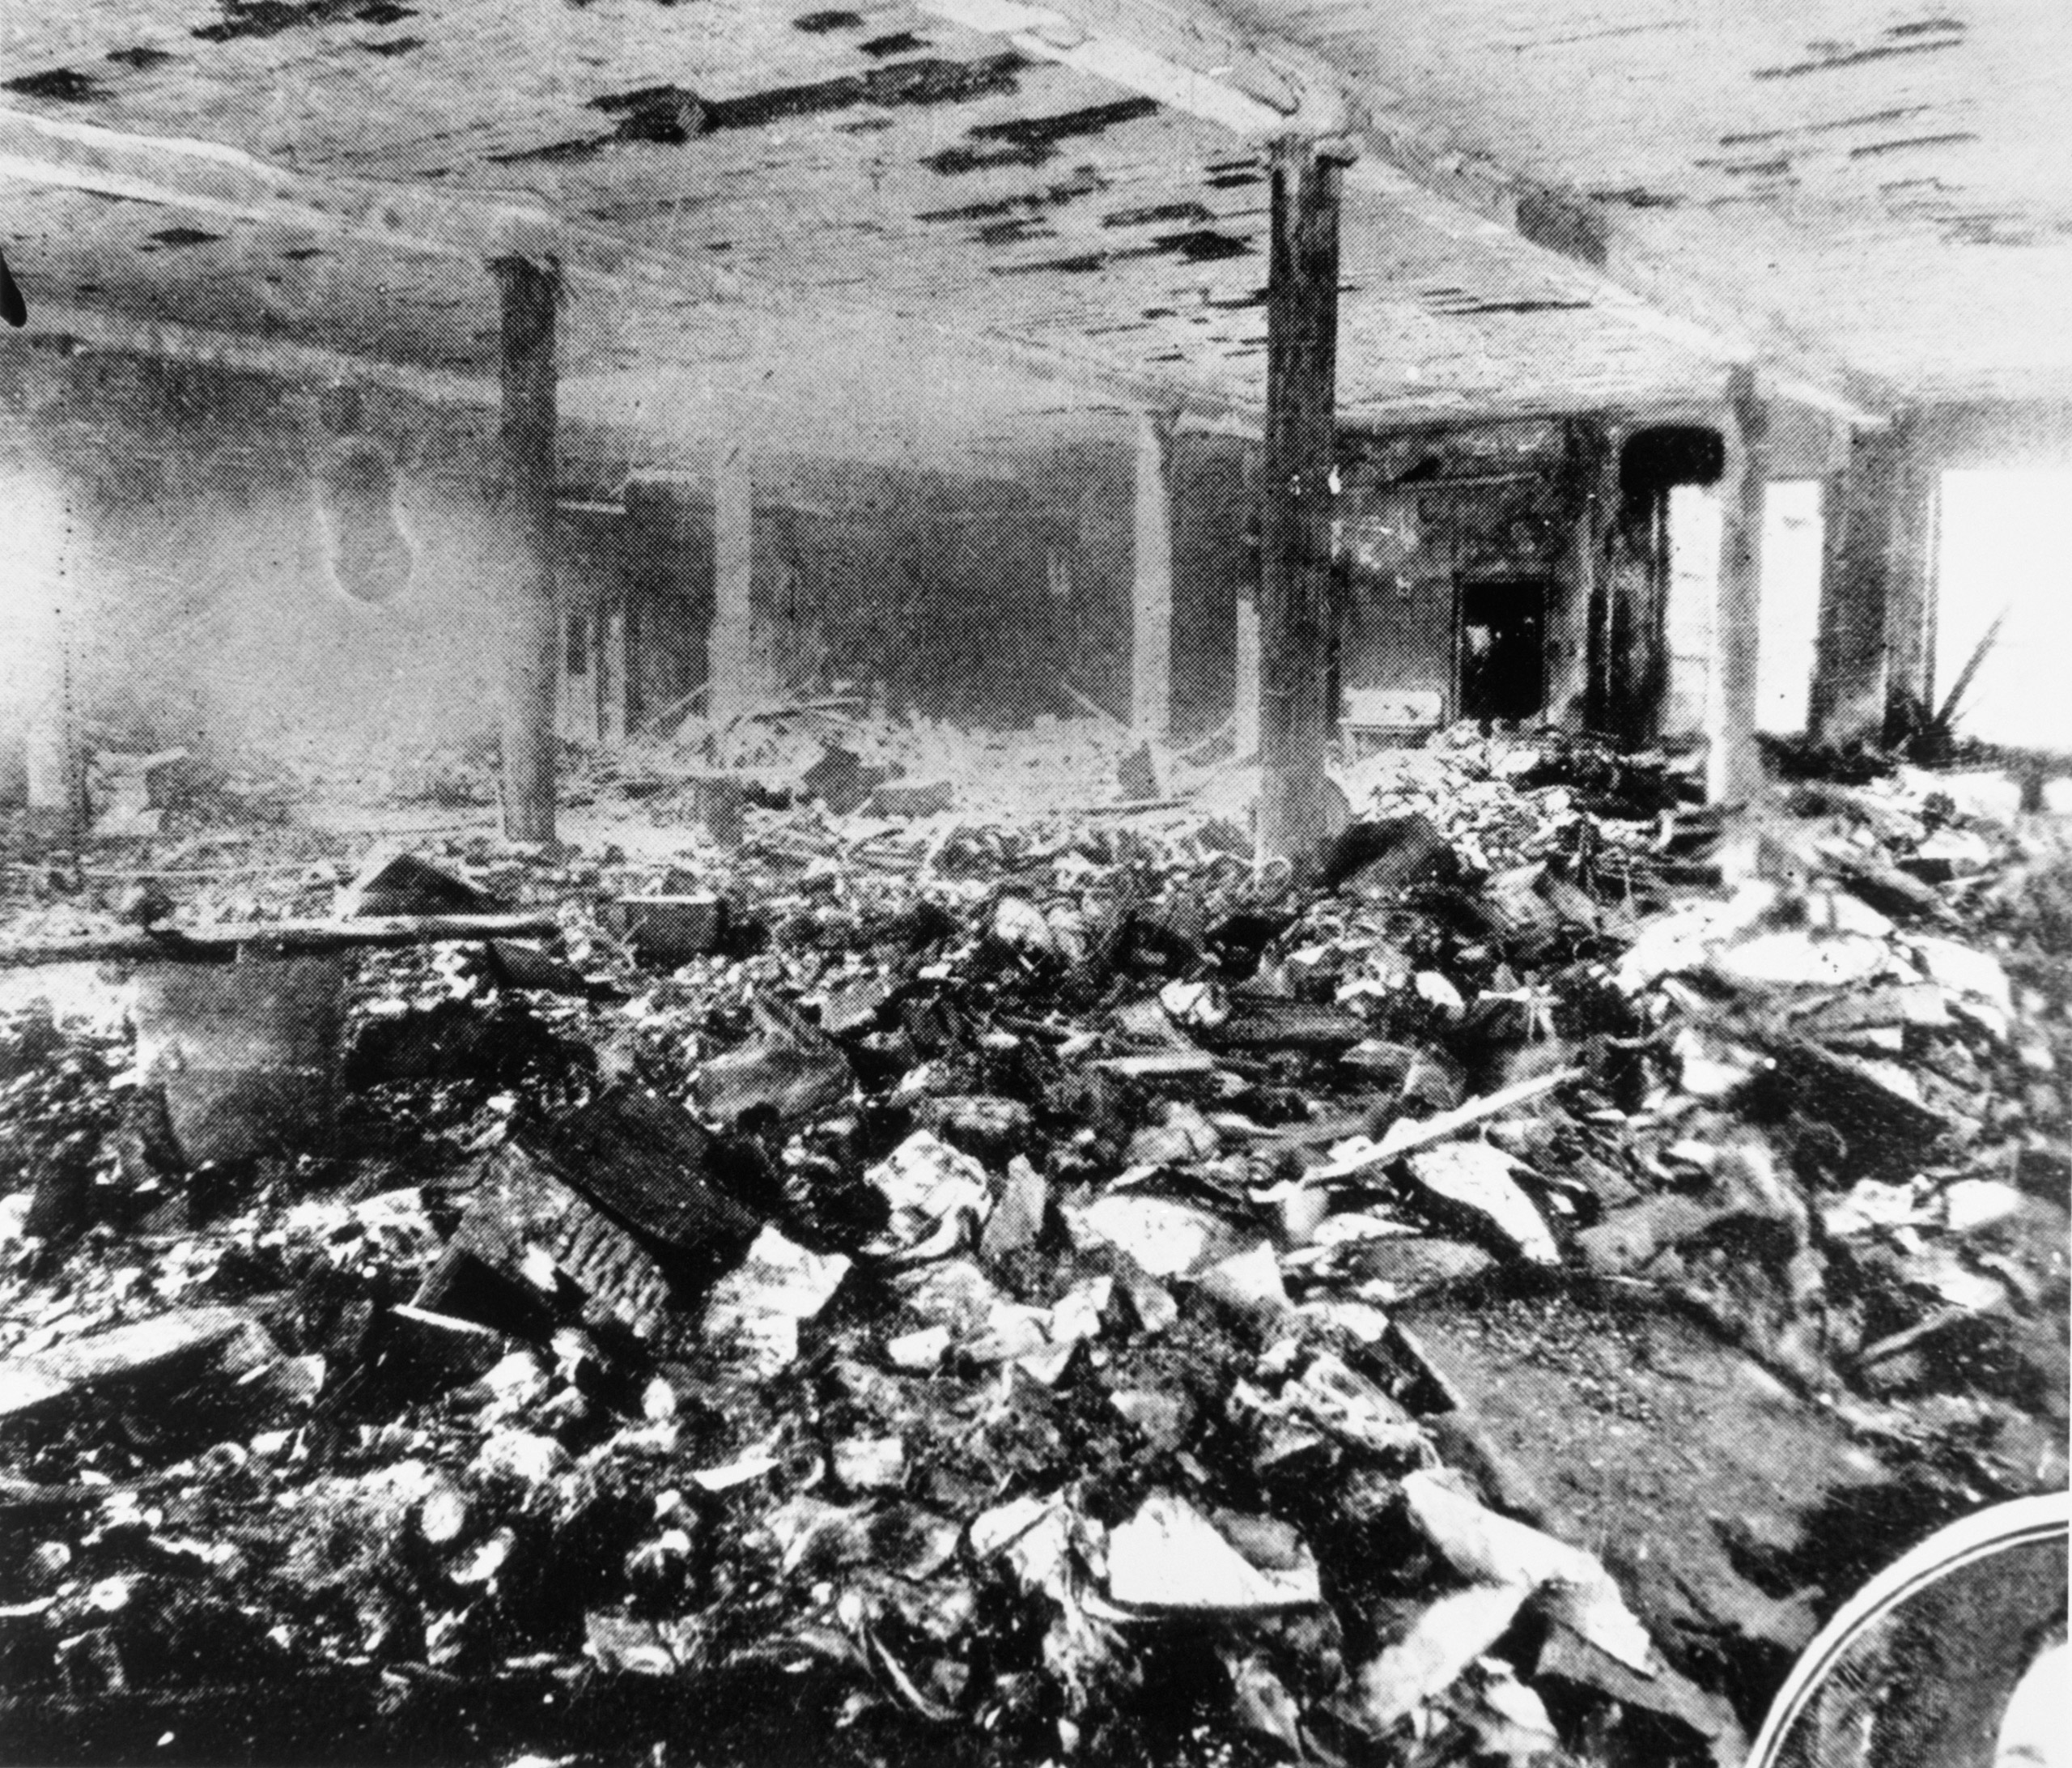 The gutted remains of the tenth floor, with only the floors and walls intact from the Triangle Shirtwaist Factory Fire. March 25, 1911.